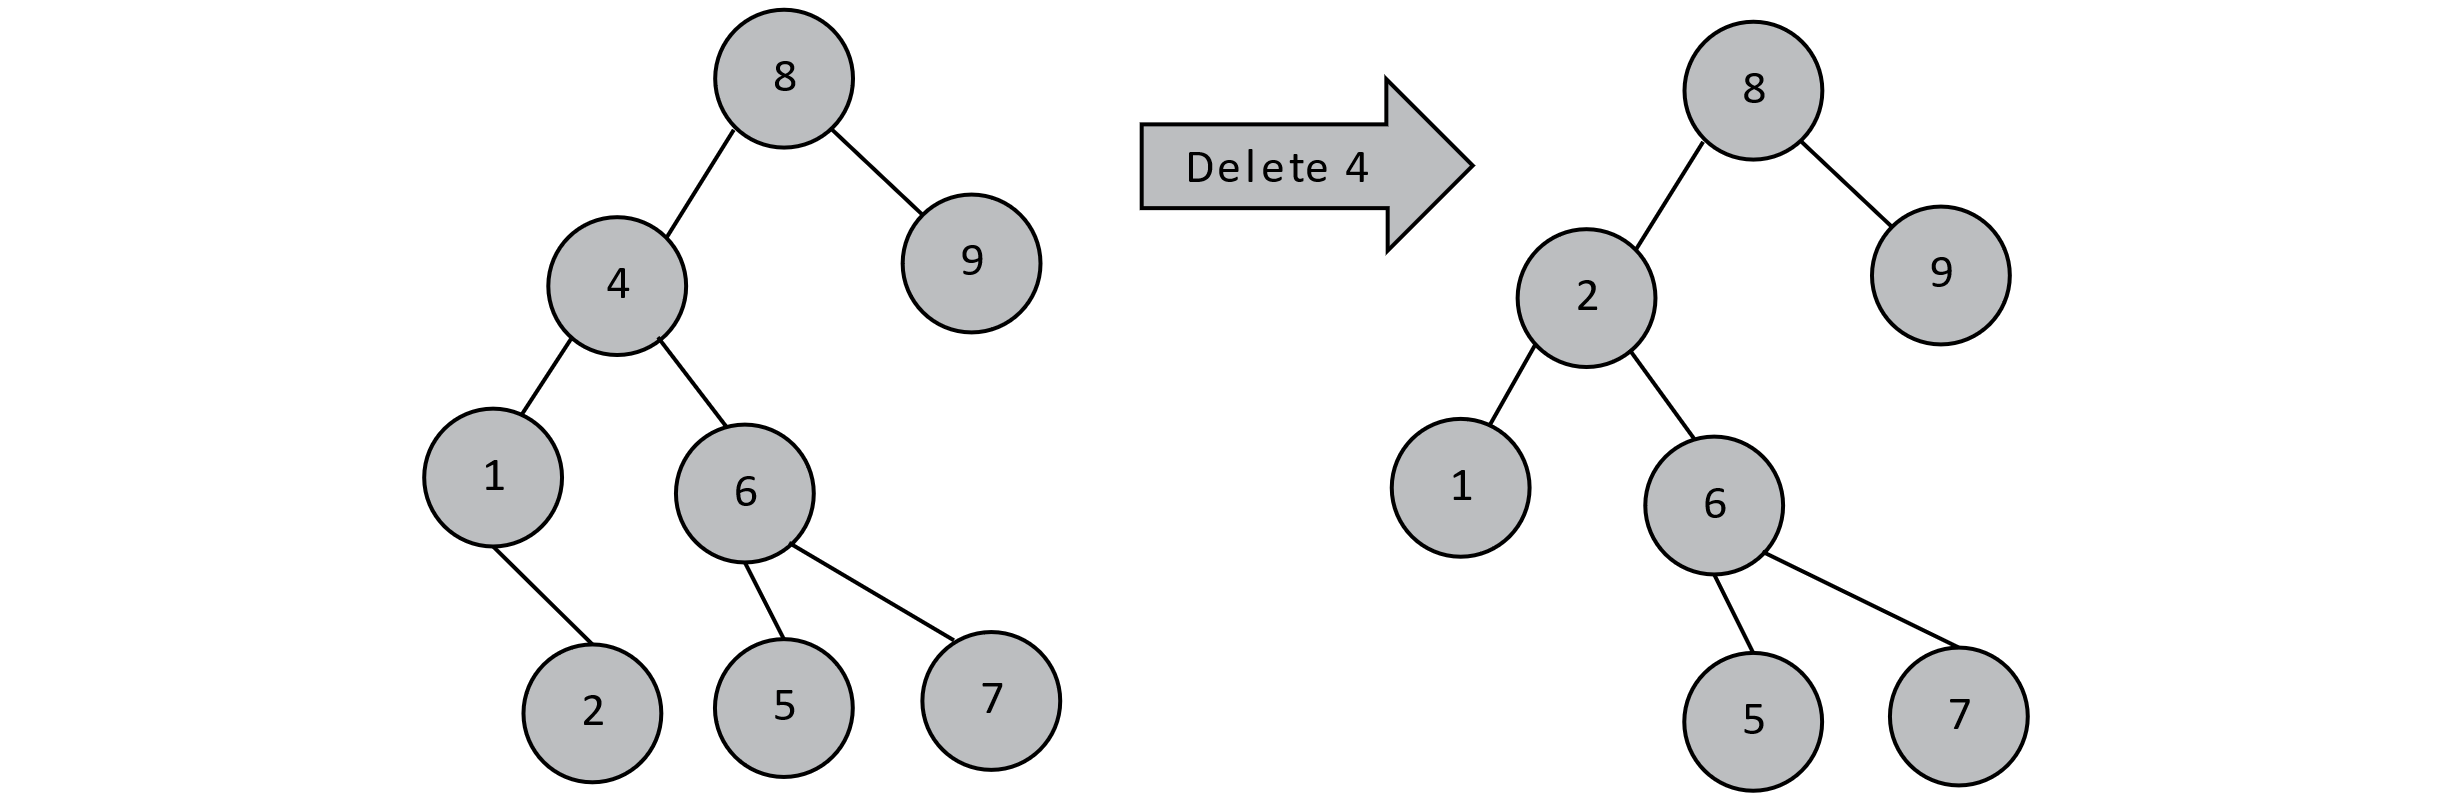 Deleting a node with two children promoting the in-order predecessor.